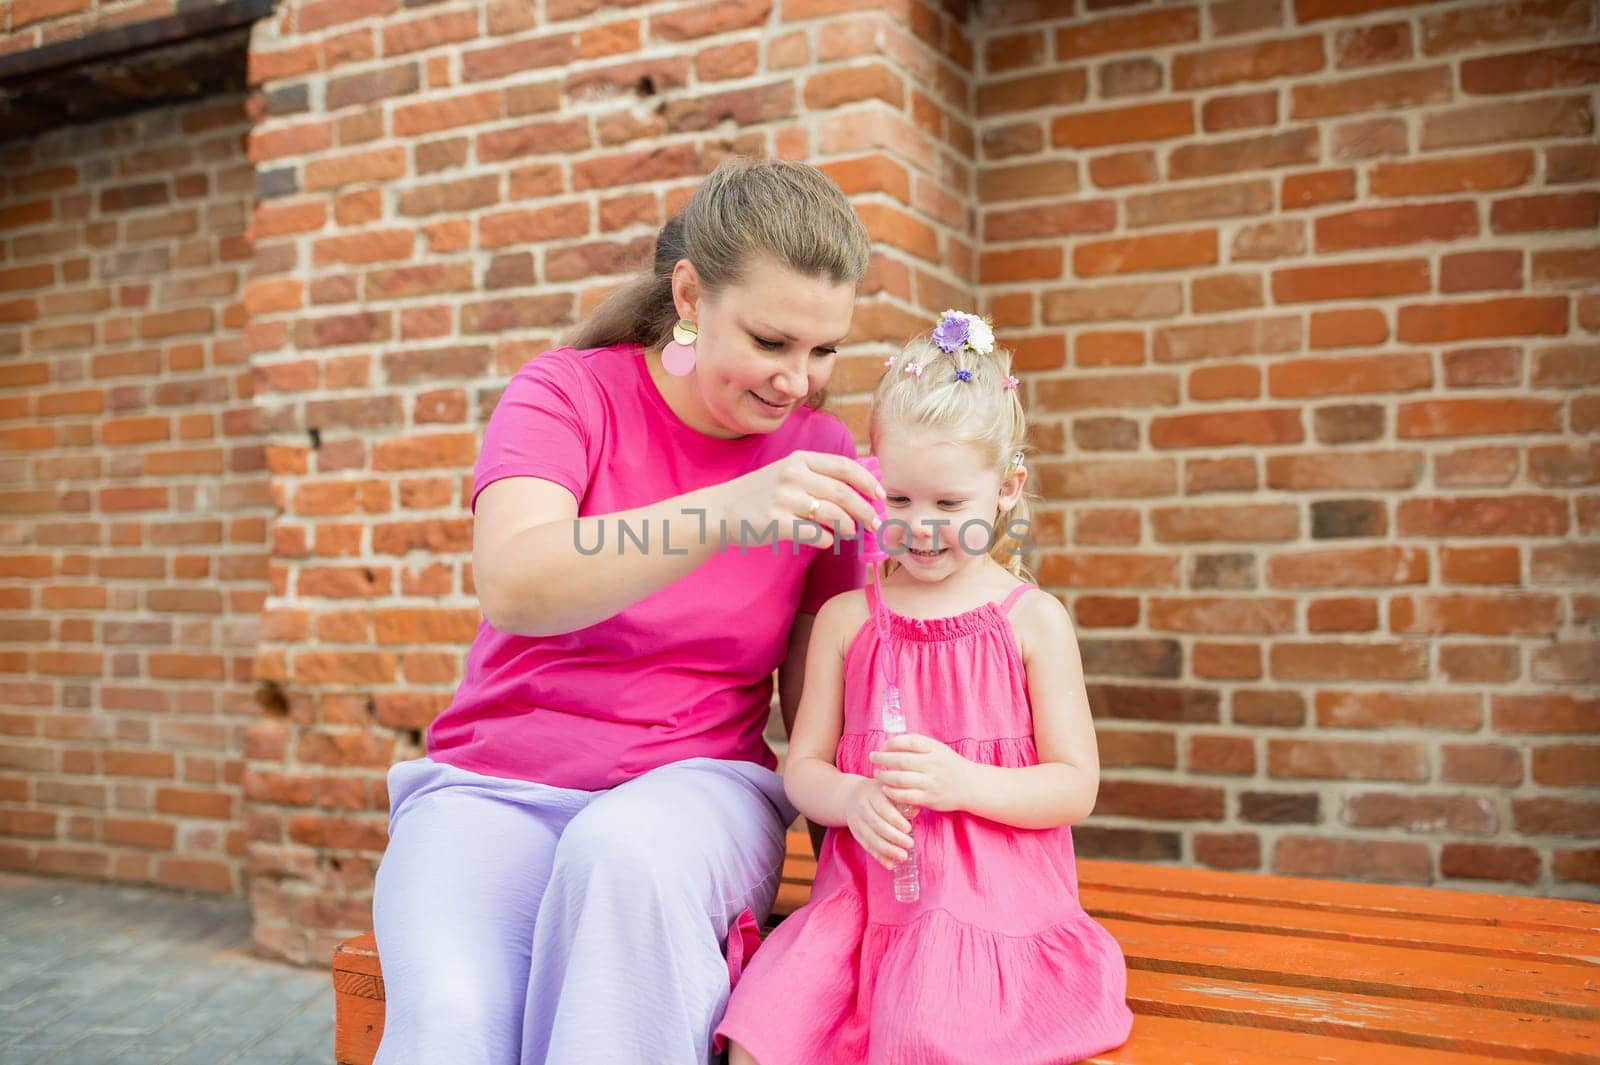 Deaf child with cochlear implant for hearing audio and aid for impairment having fun and laughs with mother outdoor in summer. Sound fitting device to help with communication listening and interaction.